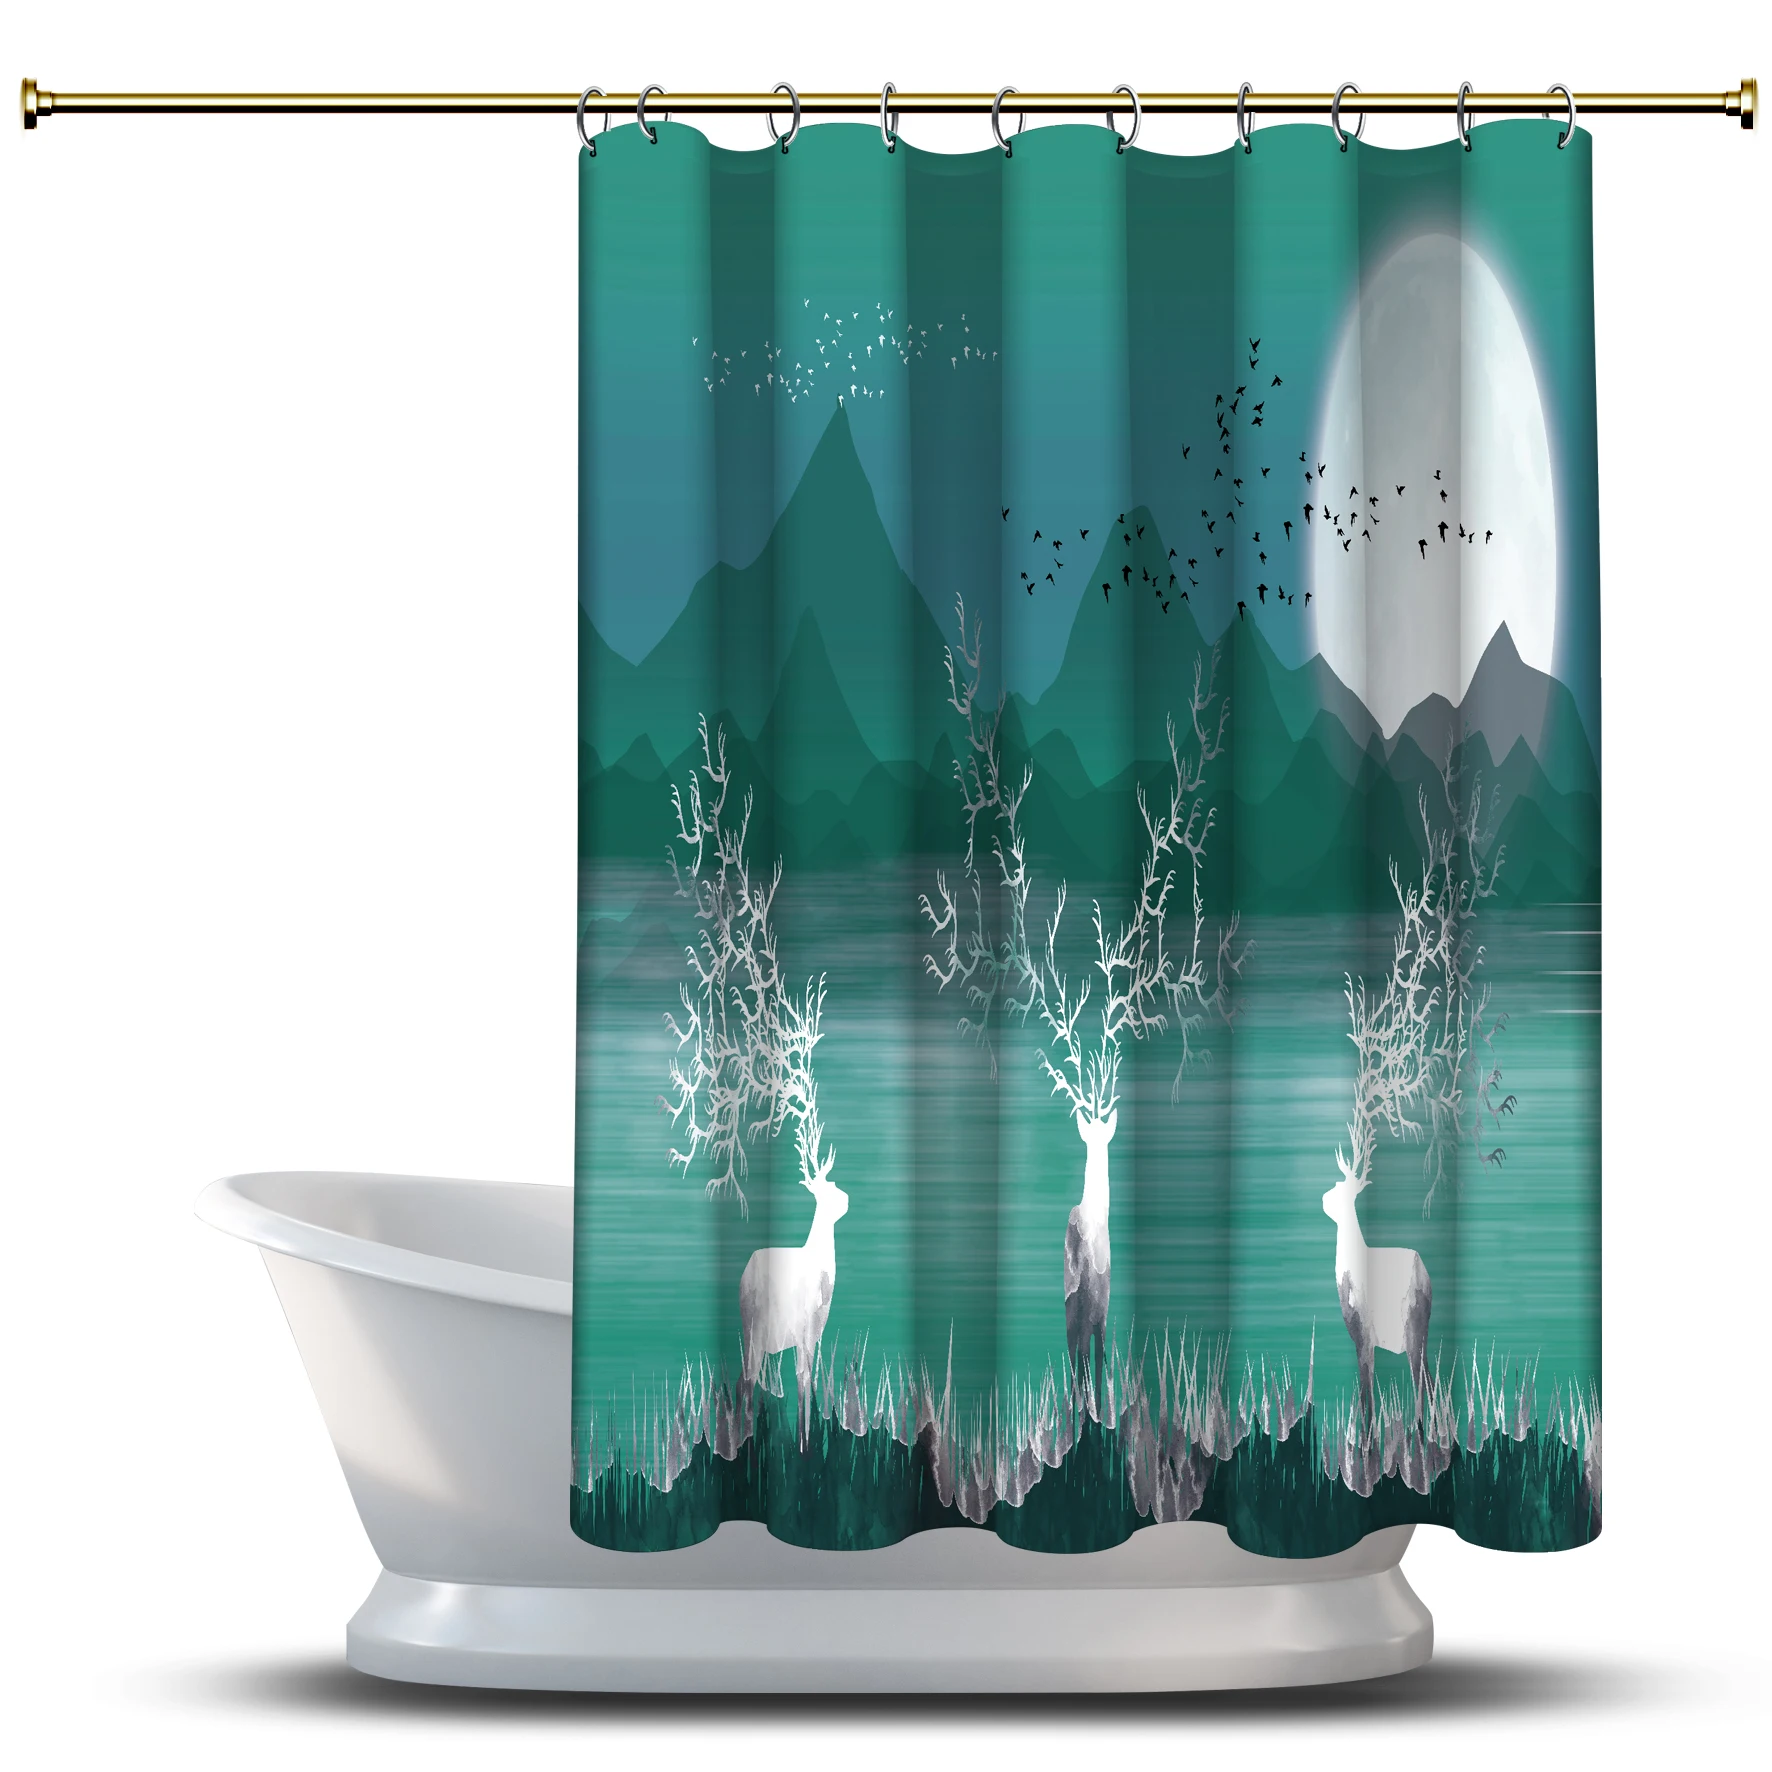 

Asian Landscape Printed Shower Curtain / Waterproof for Your Bathroom Decorations - Deer, River in the first, green decor